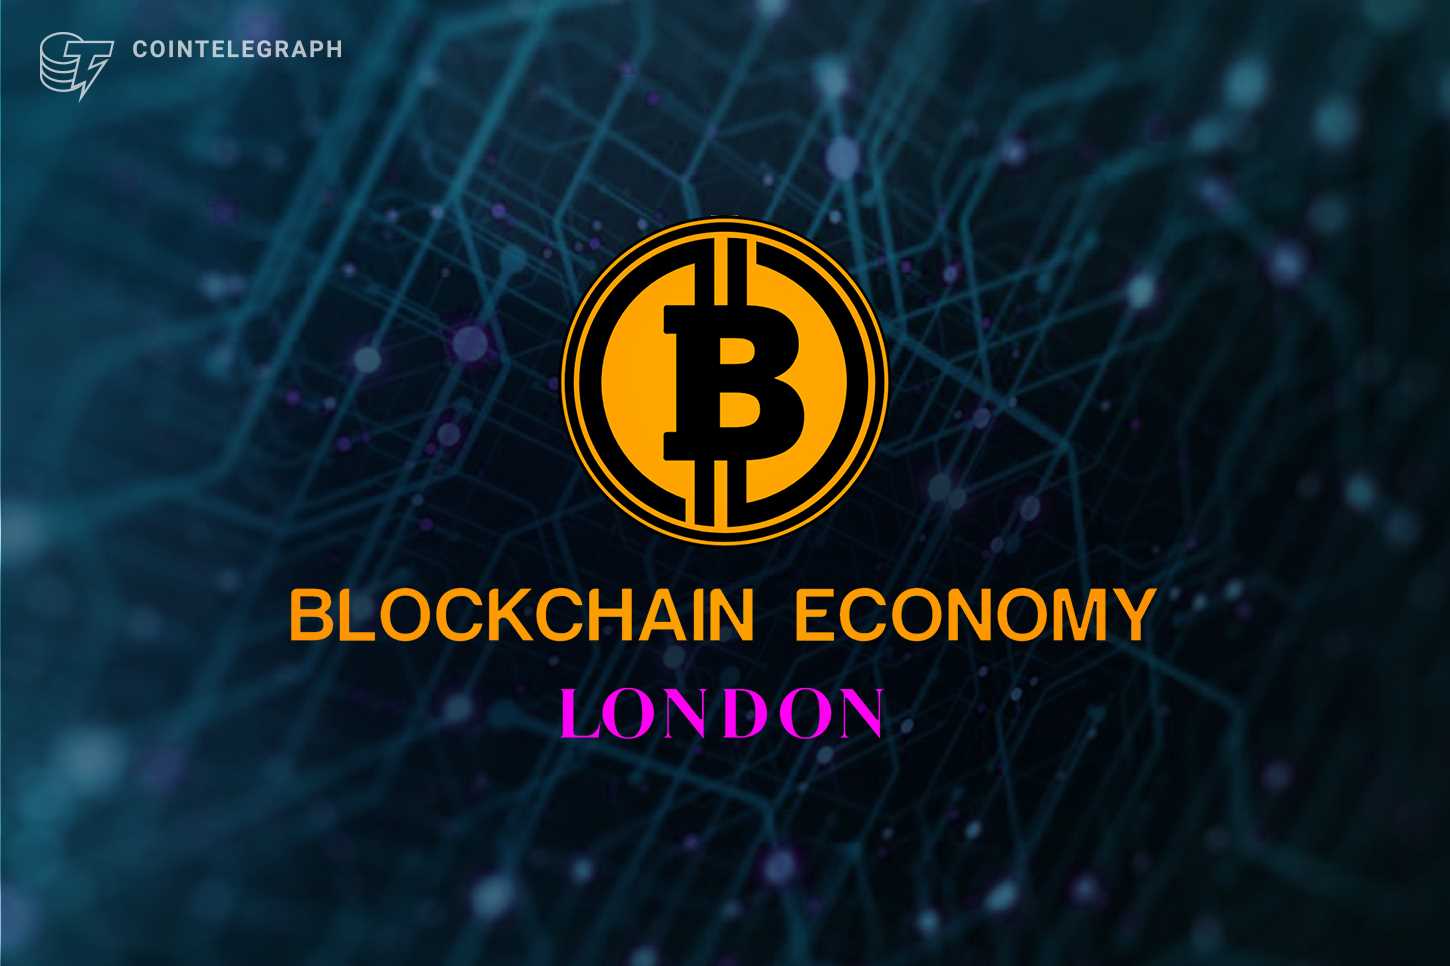 London to host the largest crypto and blockchain conference